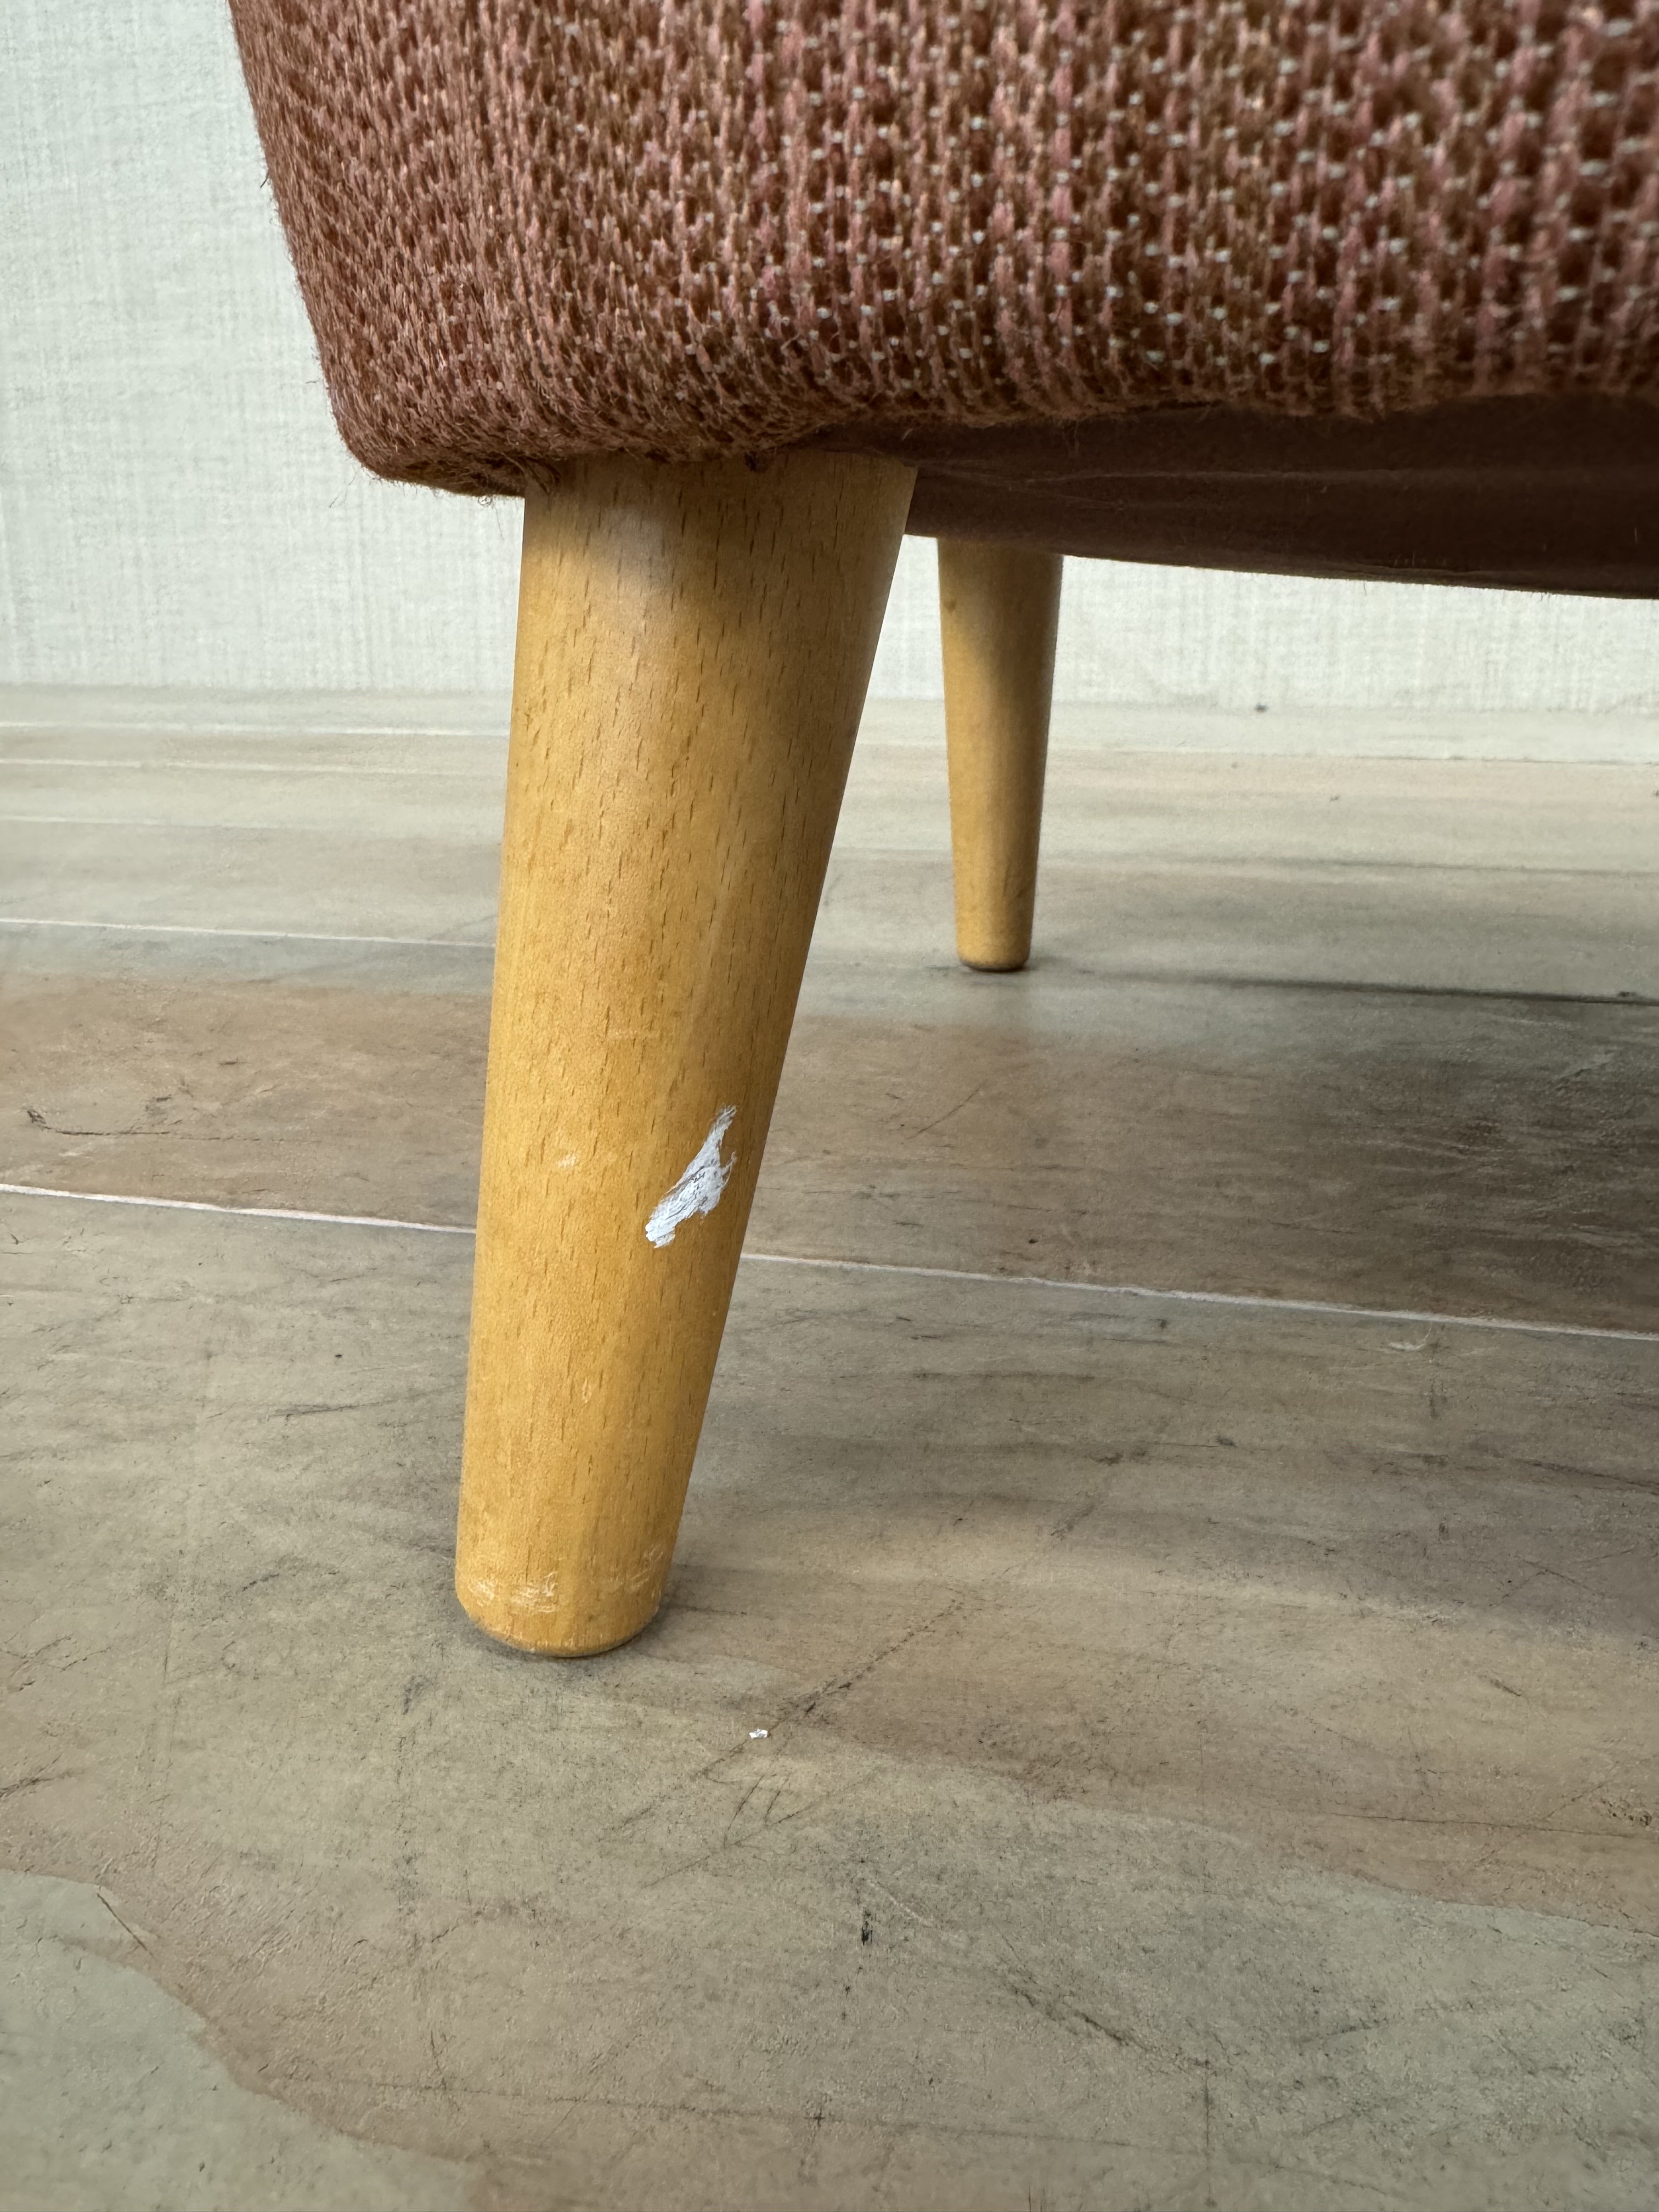 a close up of a wooden bench on a tile floor